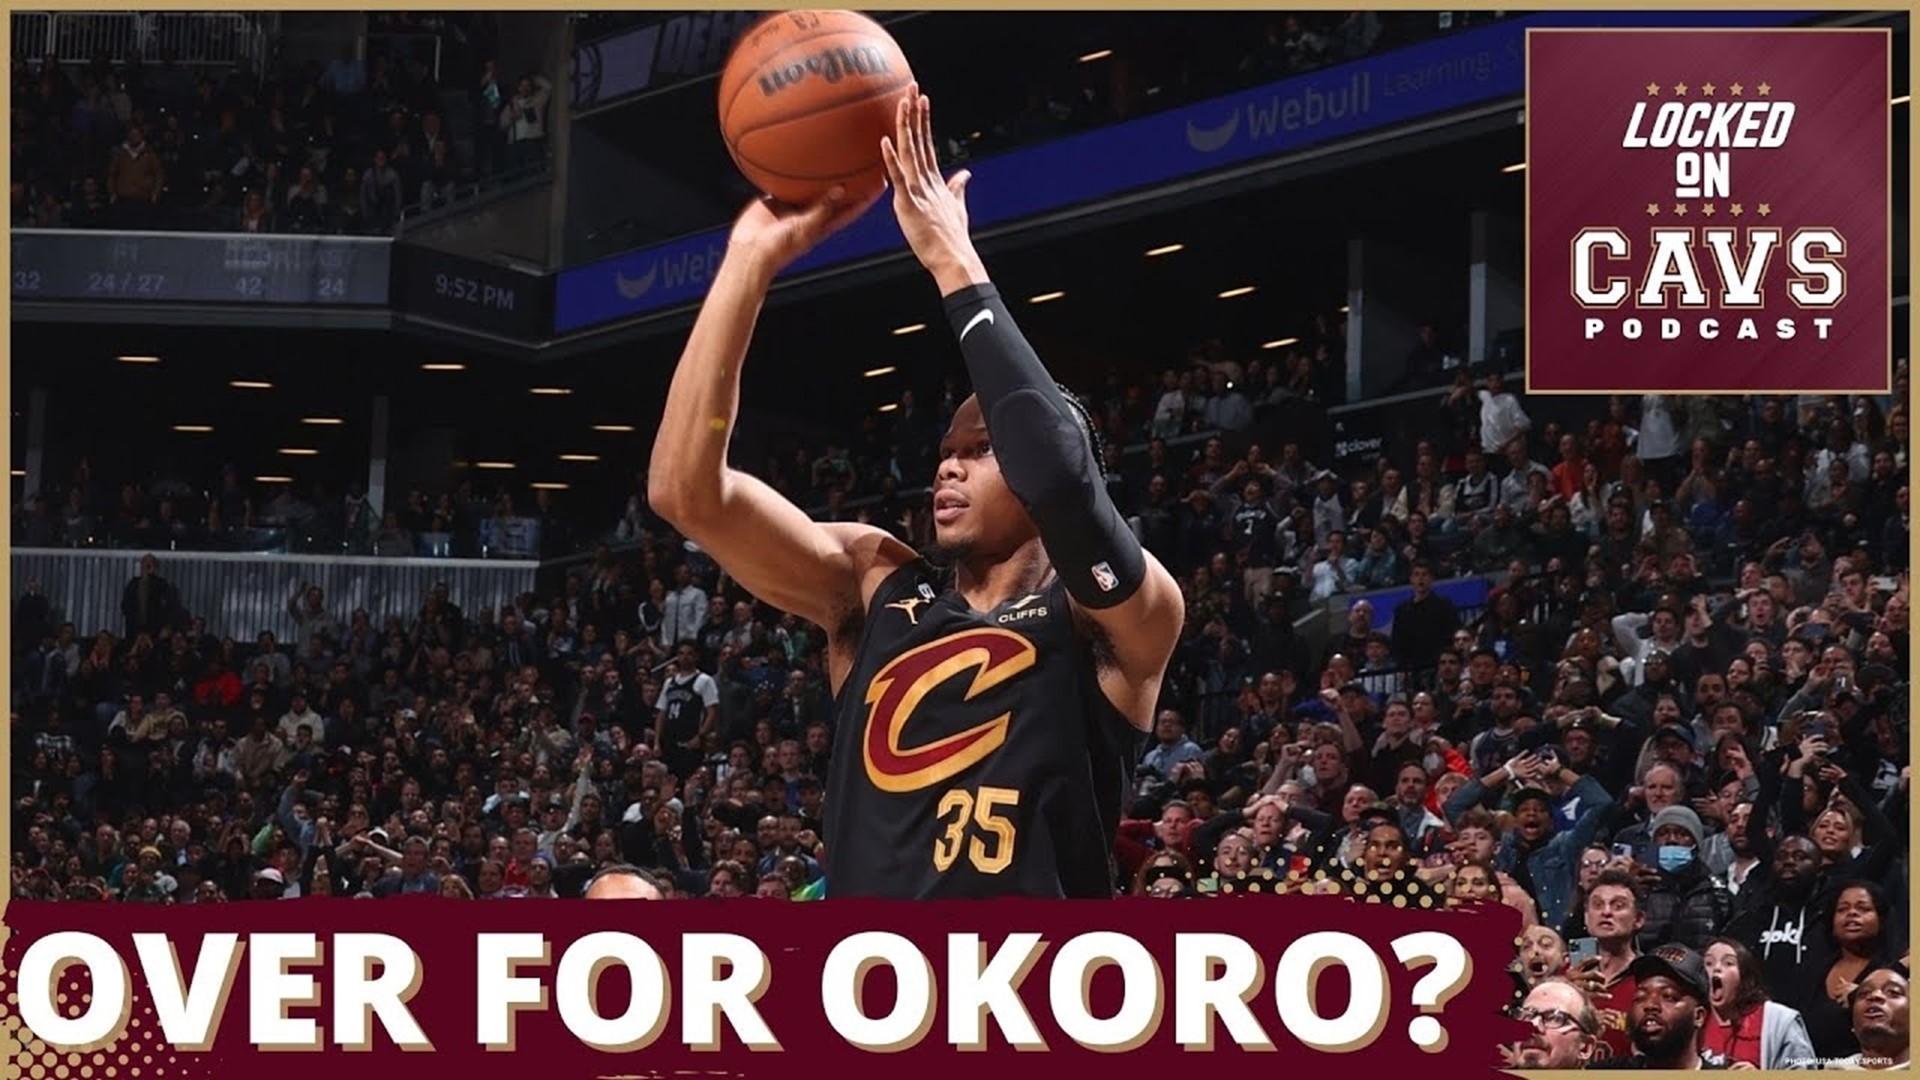 Evan discusses what the future holds for Isaac Okoro and the Cleveland Cavaliers after all the extra shooting the Cavs added this offseason.